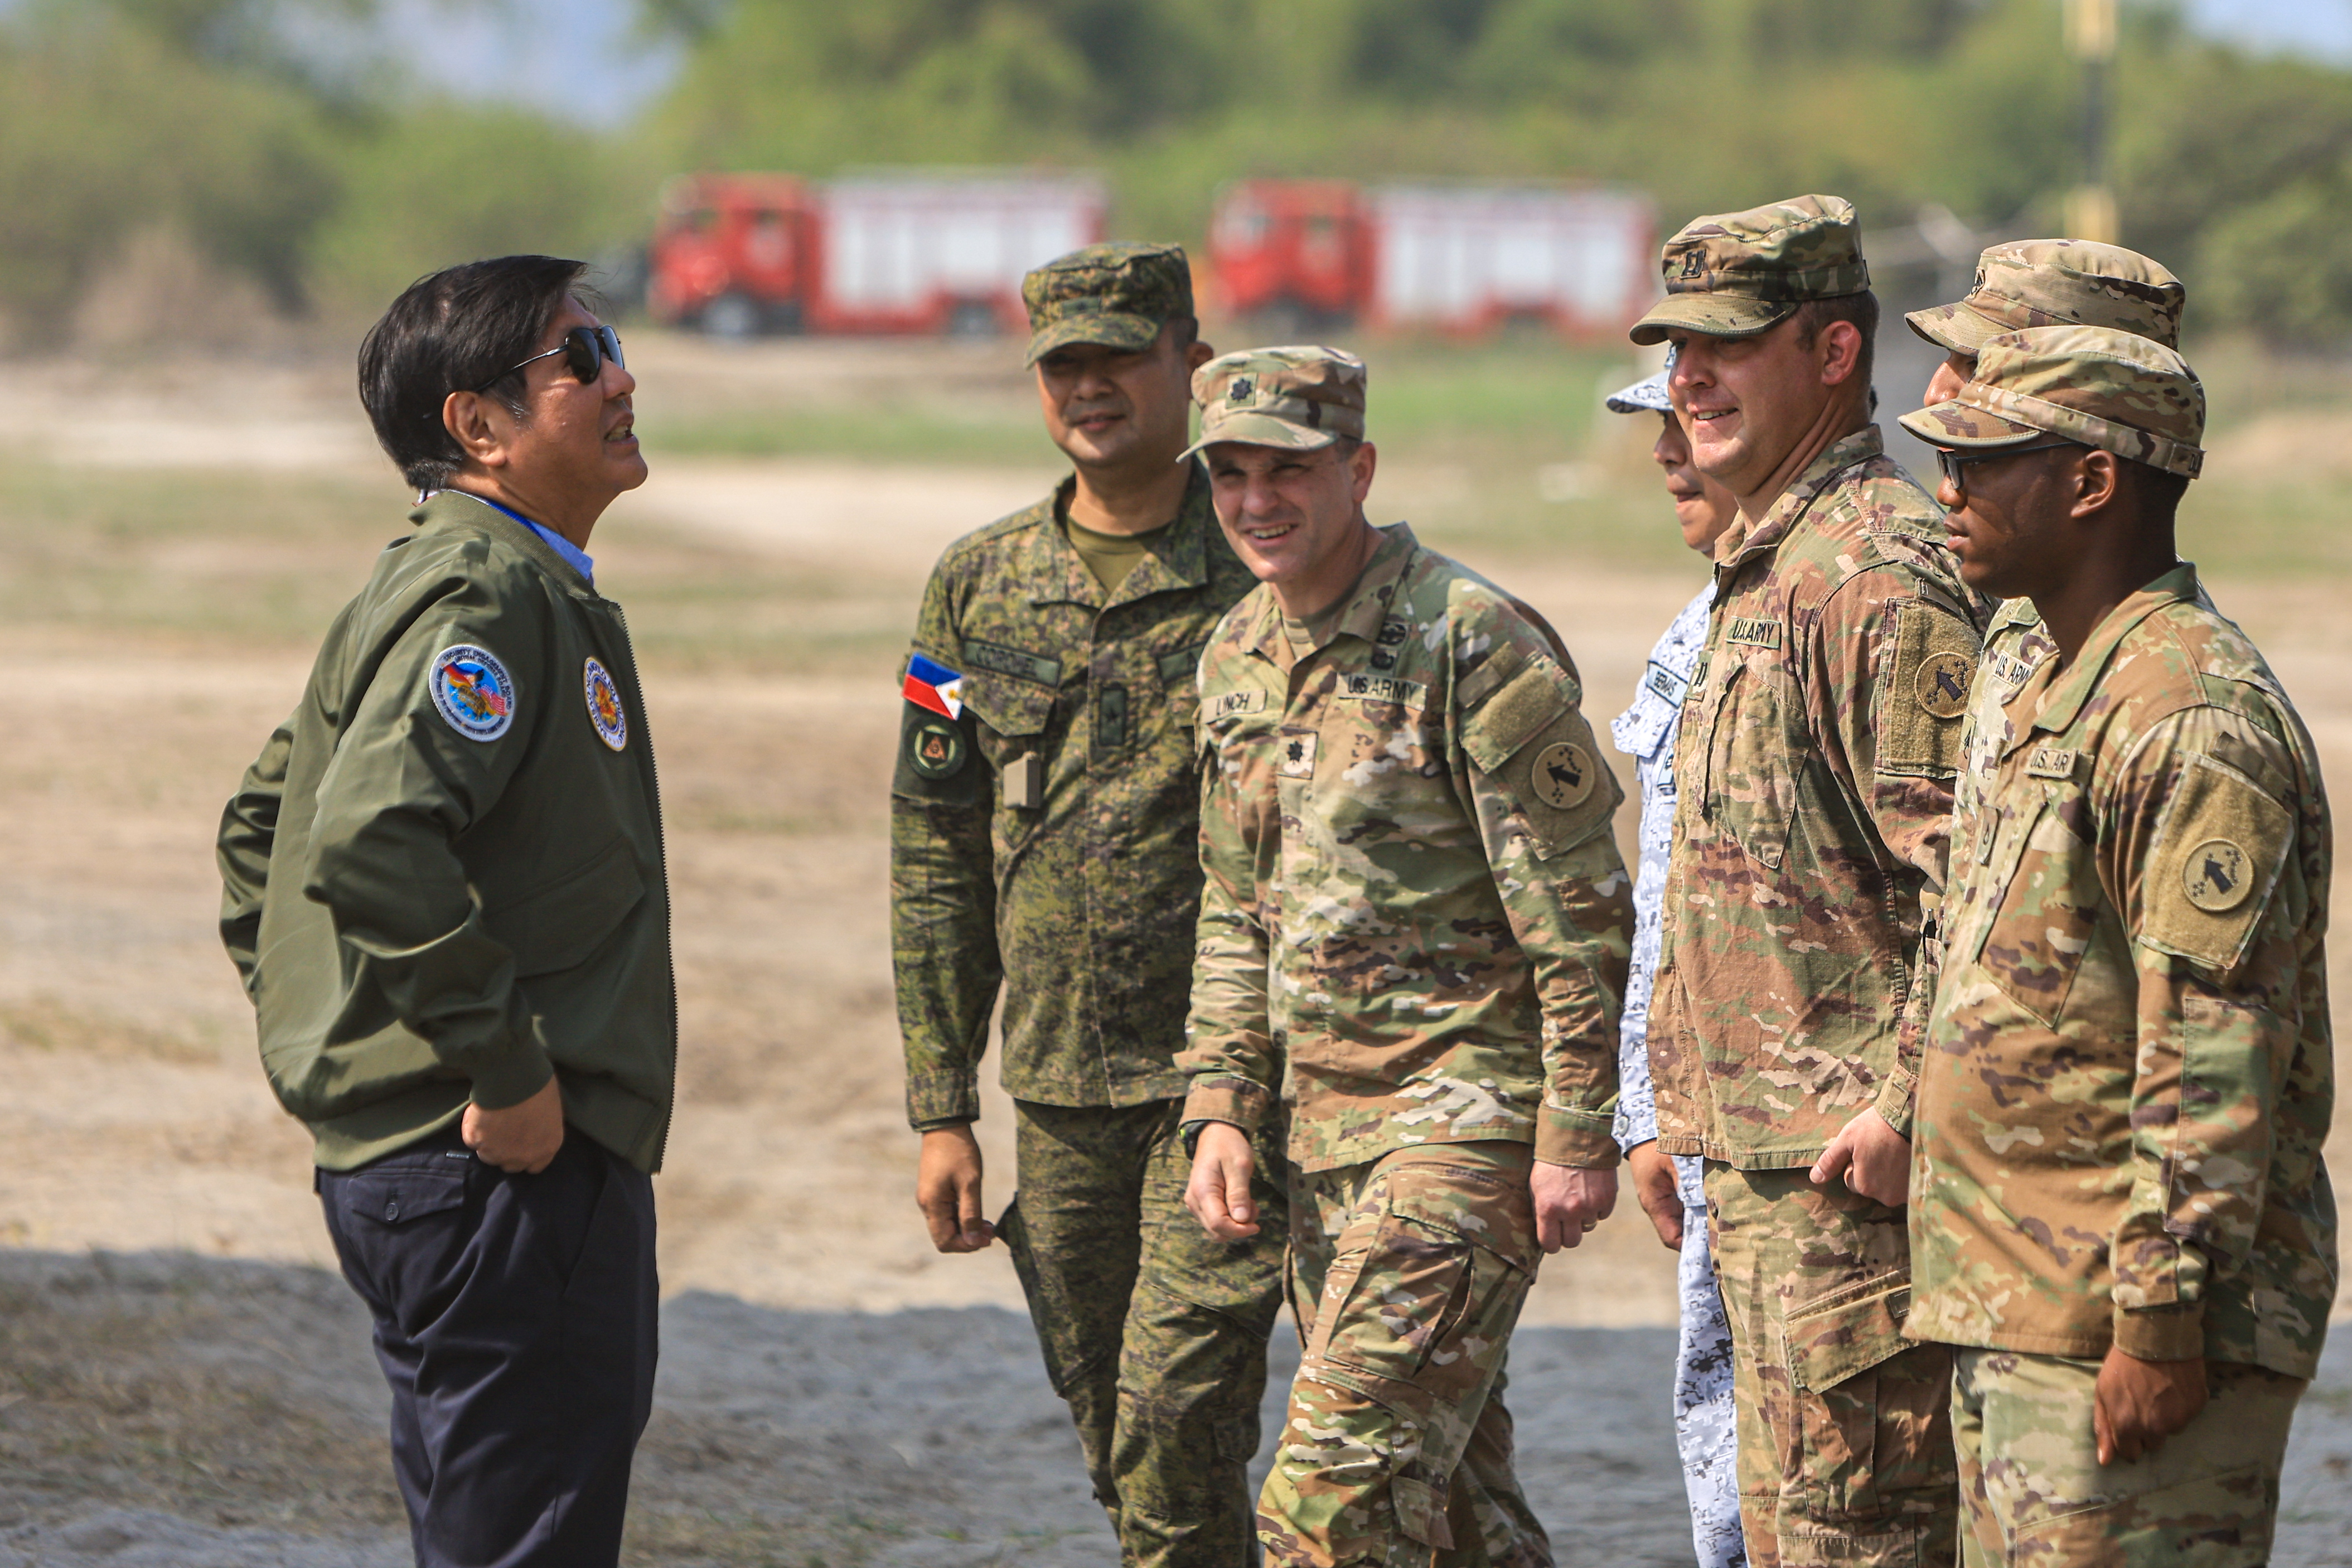 Filipino President Ferdinand Marcos Jr. meets with Filipino and American soldiers at a naval base, as he watches the Combined Joint Littoral Live Fire Exercise as part of the US-Philippines Balikatan Exercises in San Miguel, Zambales, The Philippines, on 28 April 2023. © Ceng Shou Yi, NurPhoto via Reuters